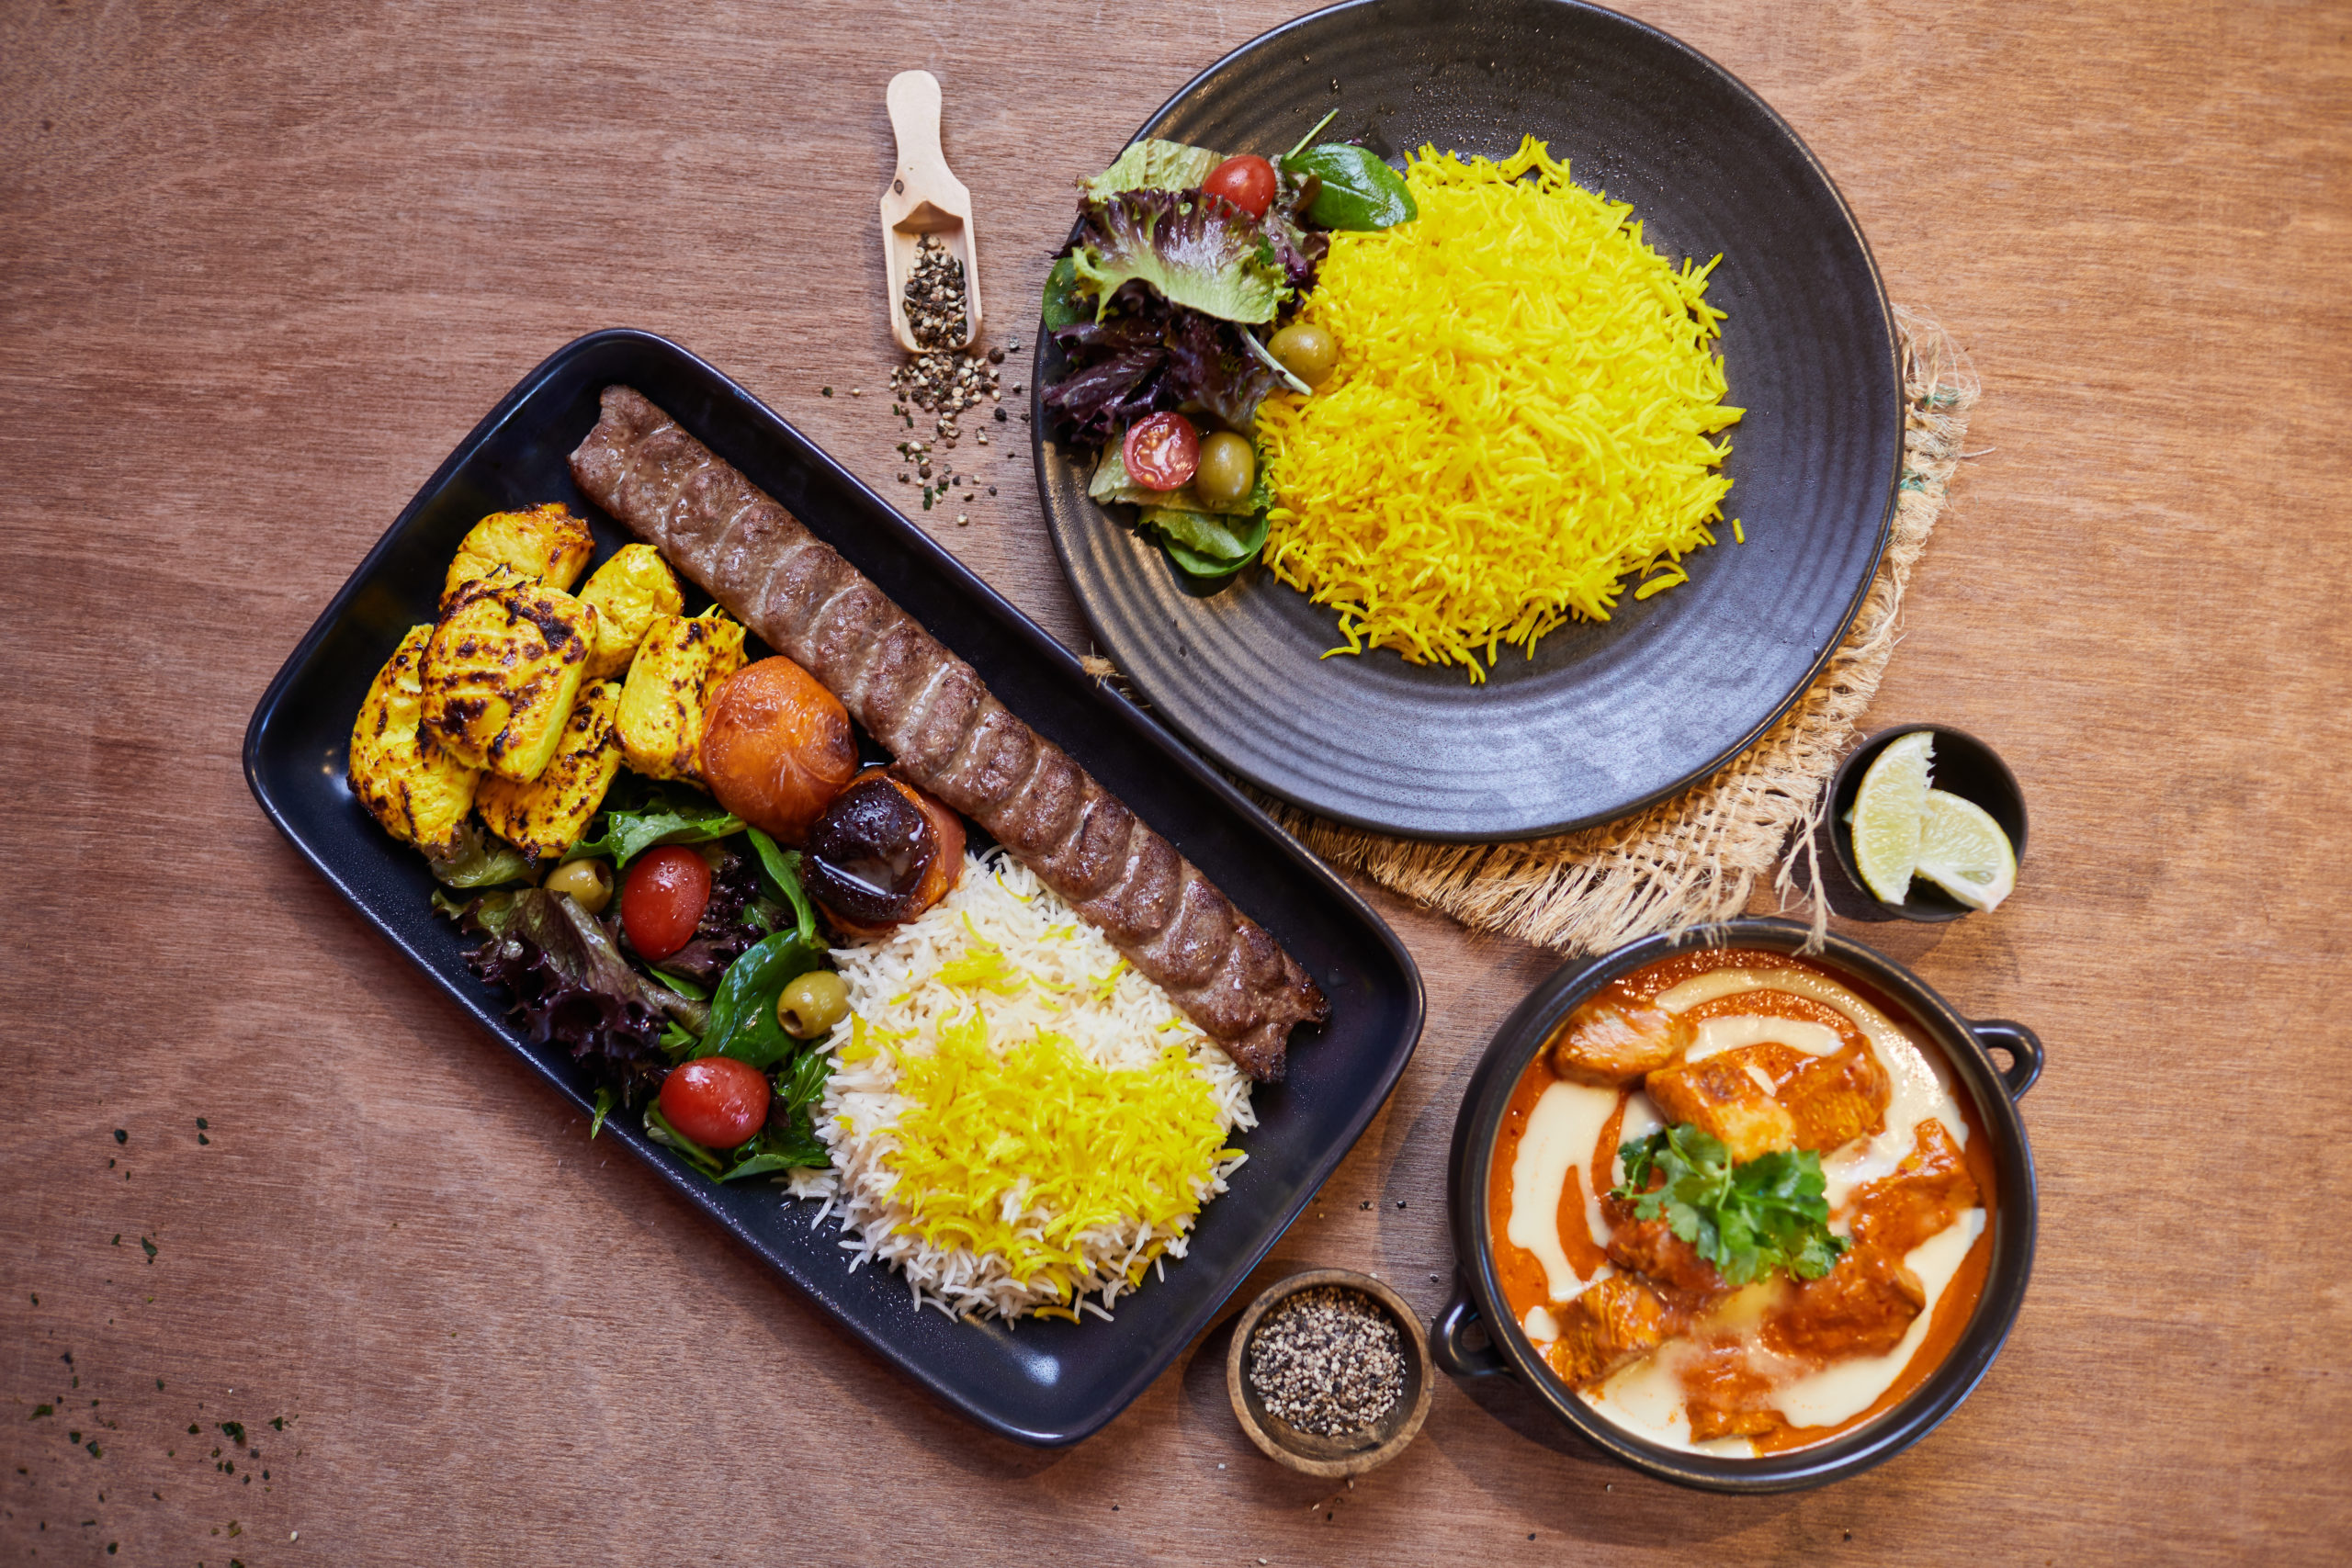 10% Off for Students at Indian and Persian Cuisines